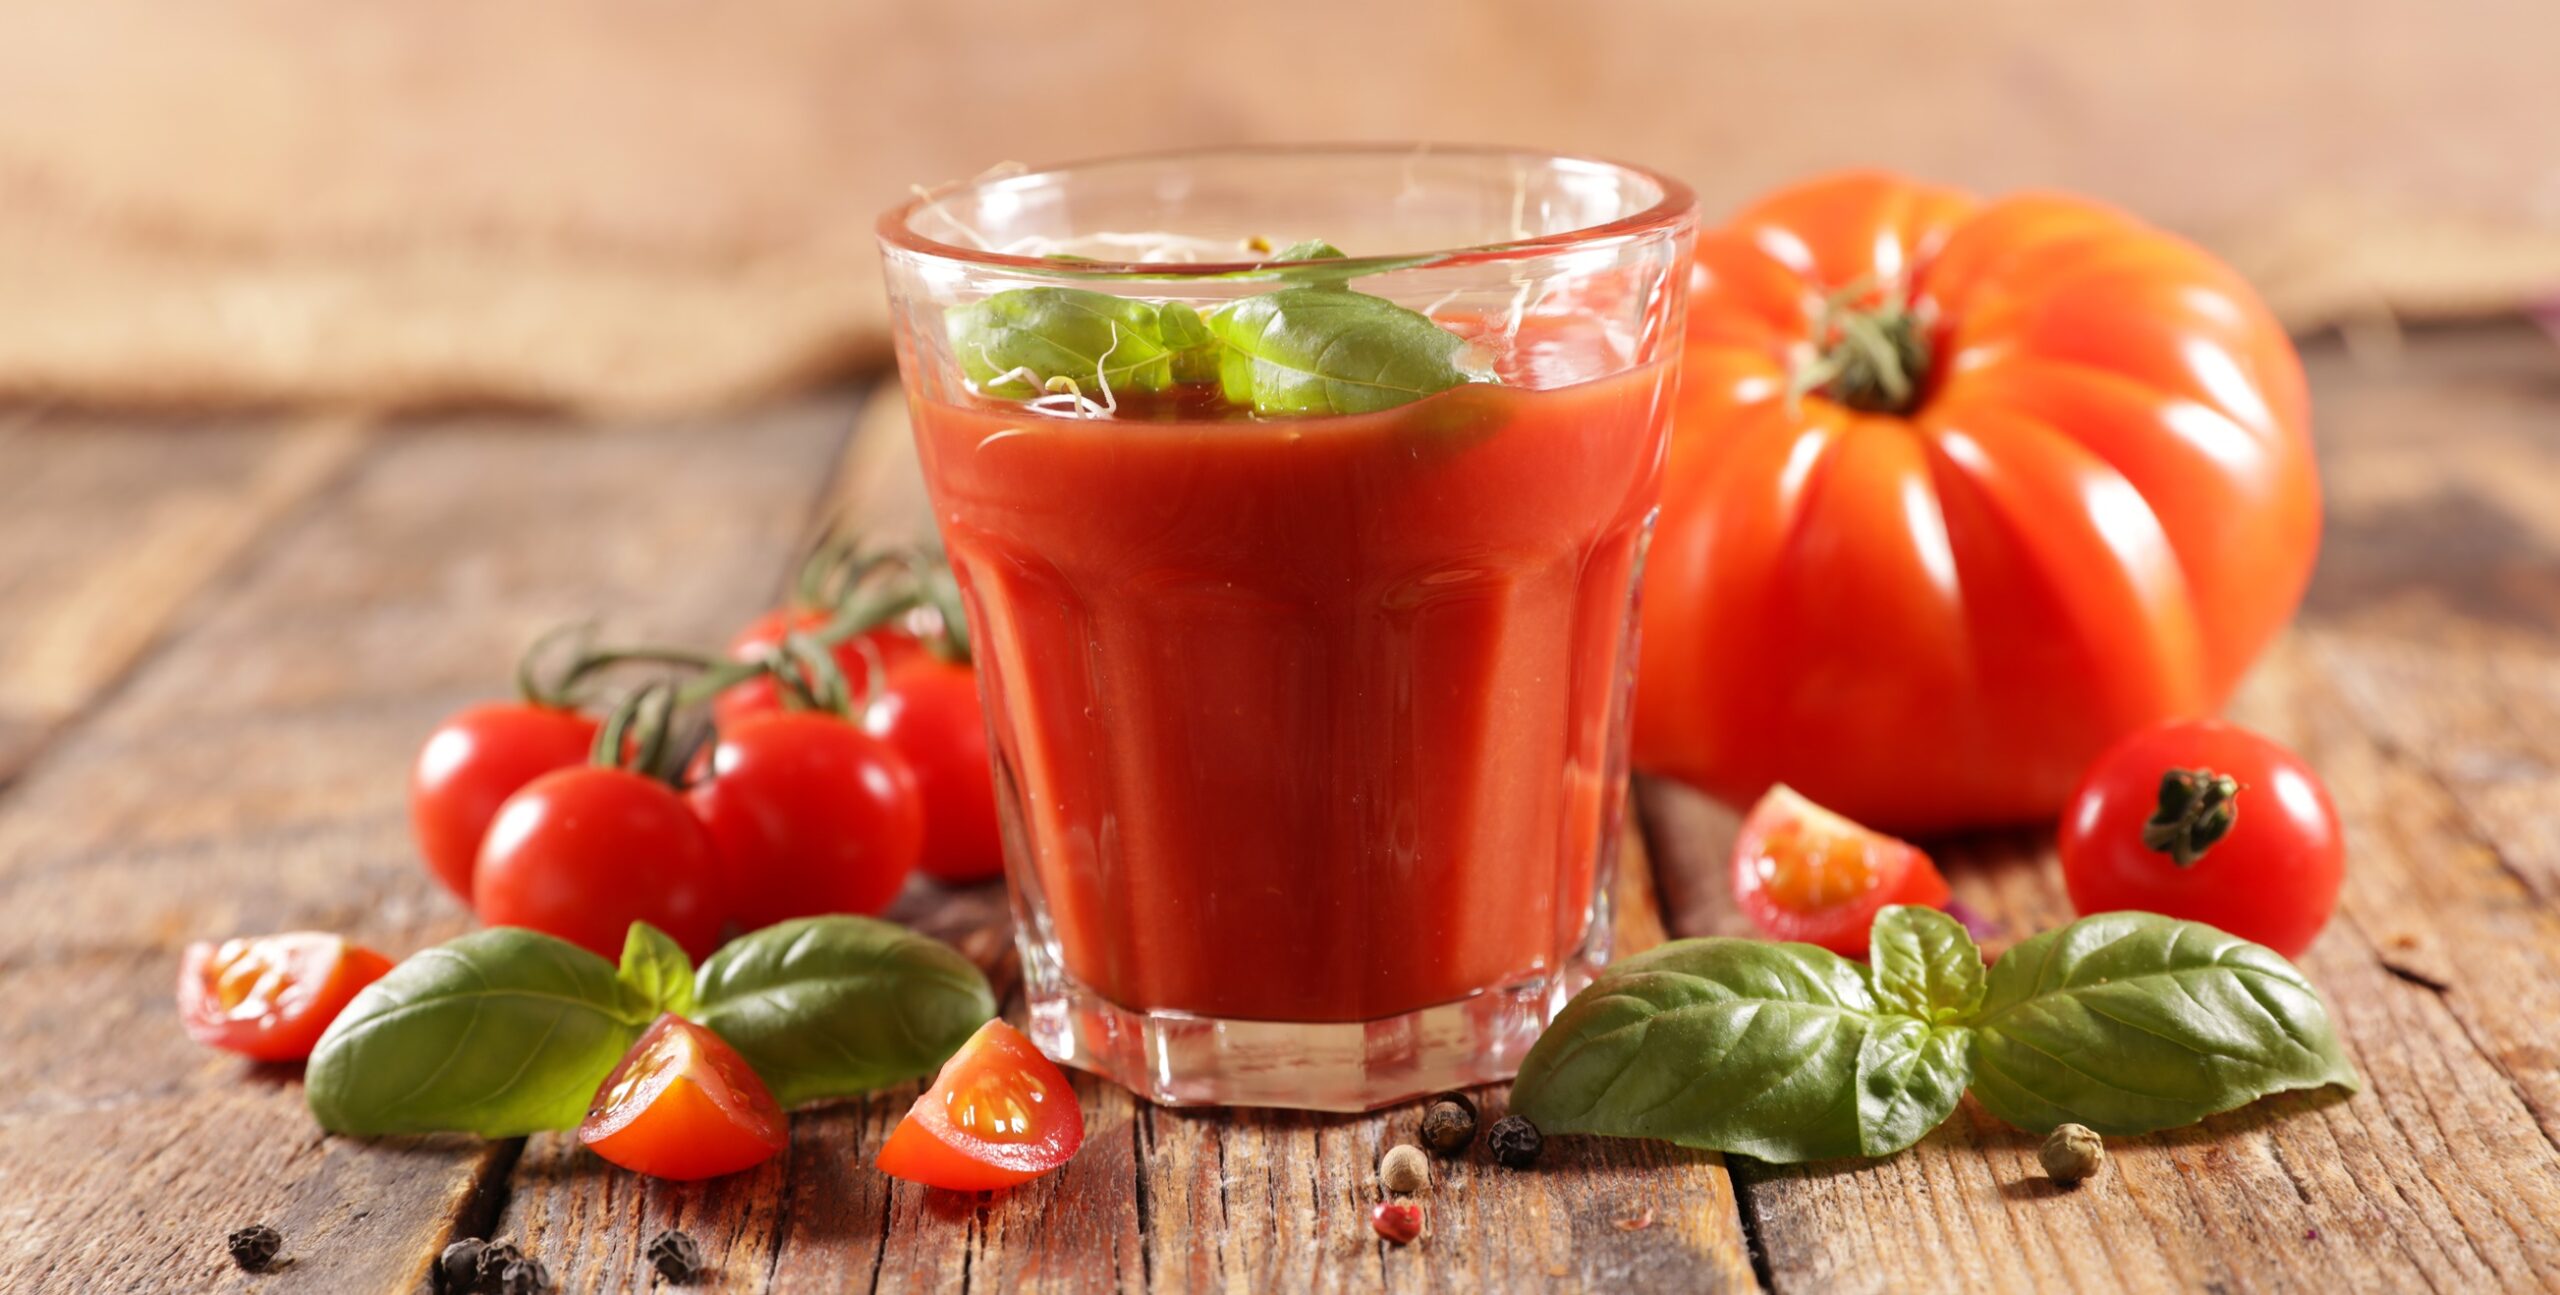 Dietary supplements: Tomato juice and seaweed could revolutionize nutrition